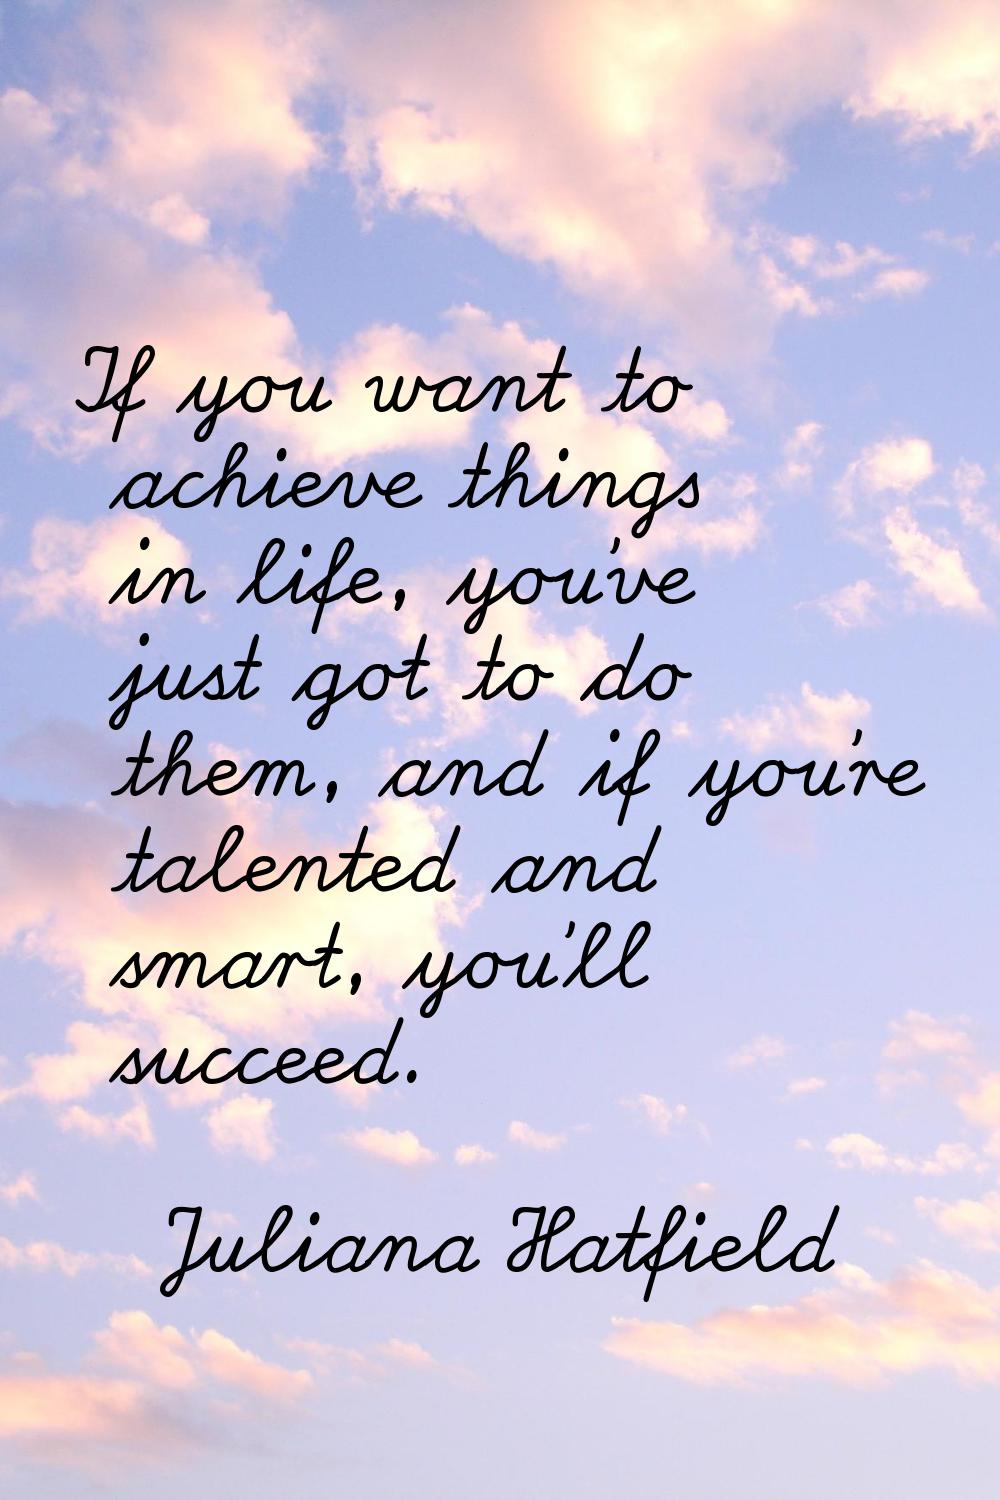 If you want to achieve things in life, you've just got to do them, and if you're talented and smart